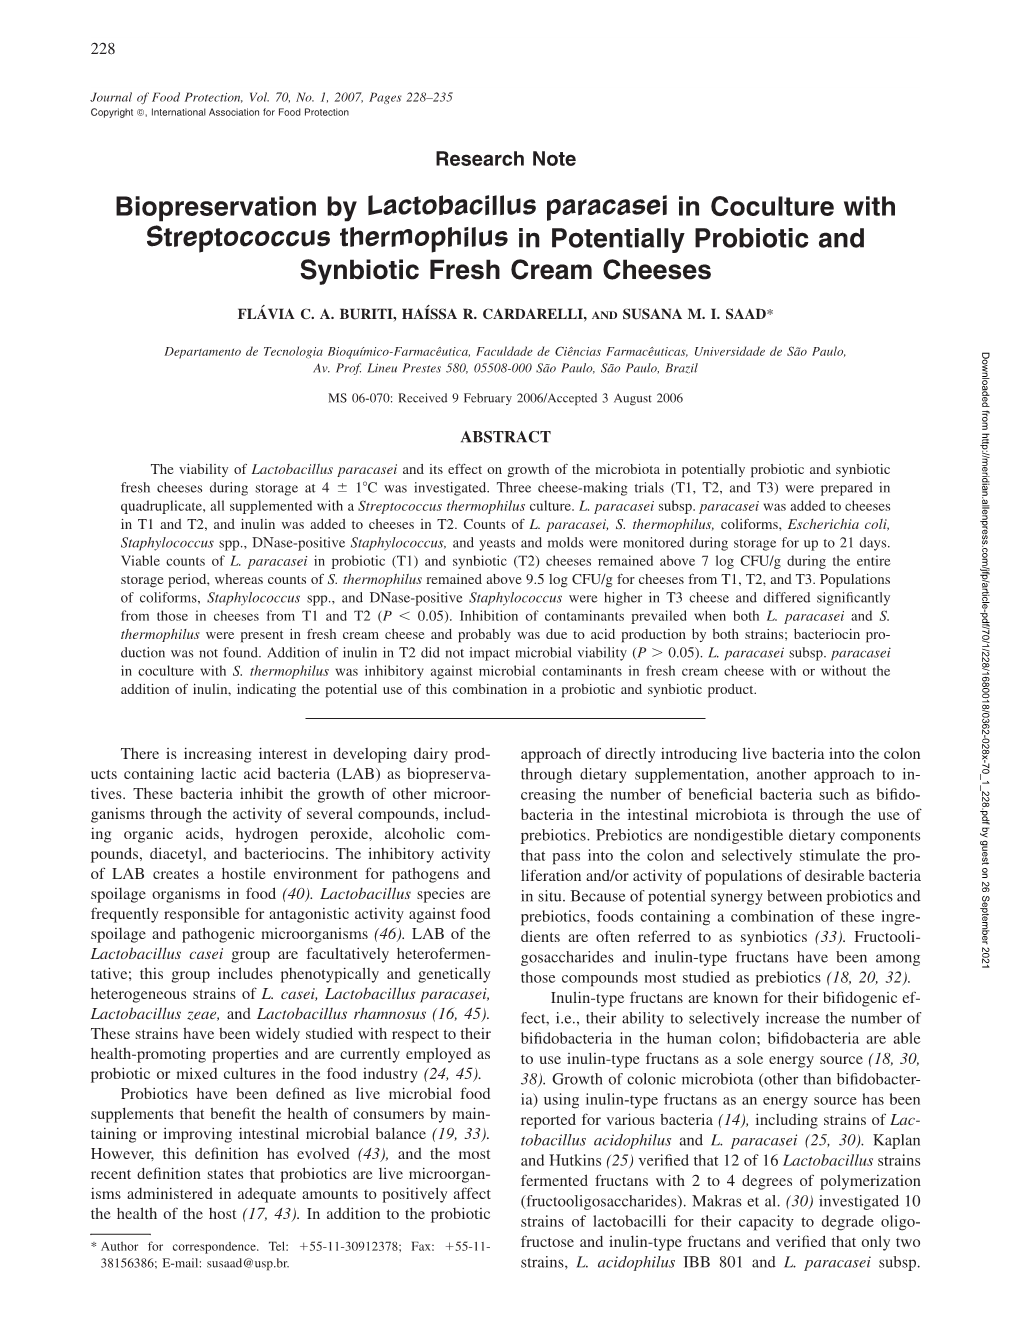 Biopreservation by Lactobacillus Paracasei in Coculture with Streptococcus Thermophilus in Potentially Probiotic and Synbiotic Fresh Cream Cheeses